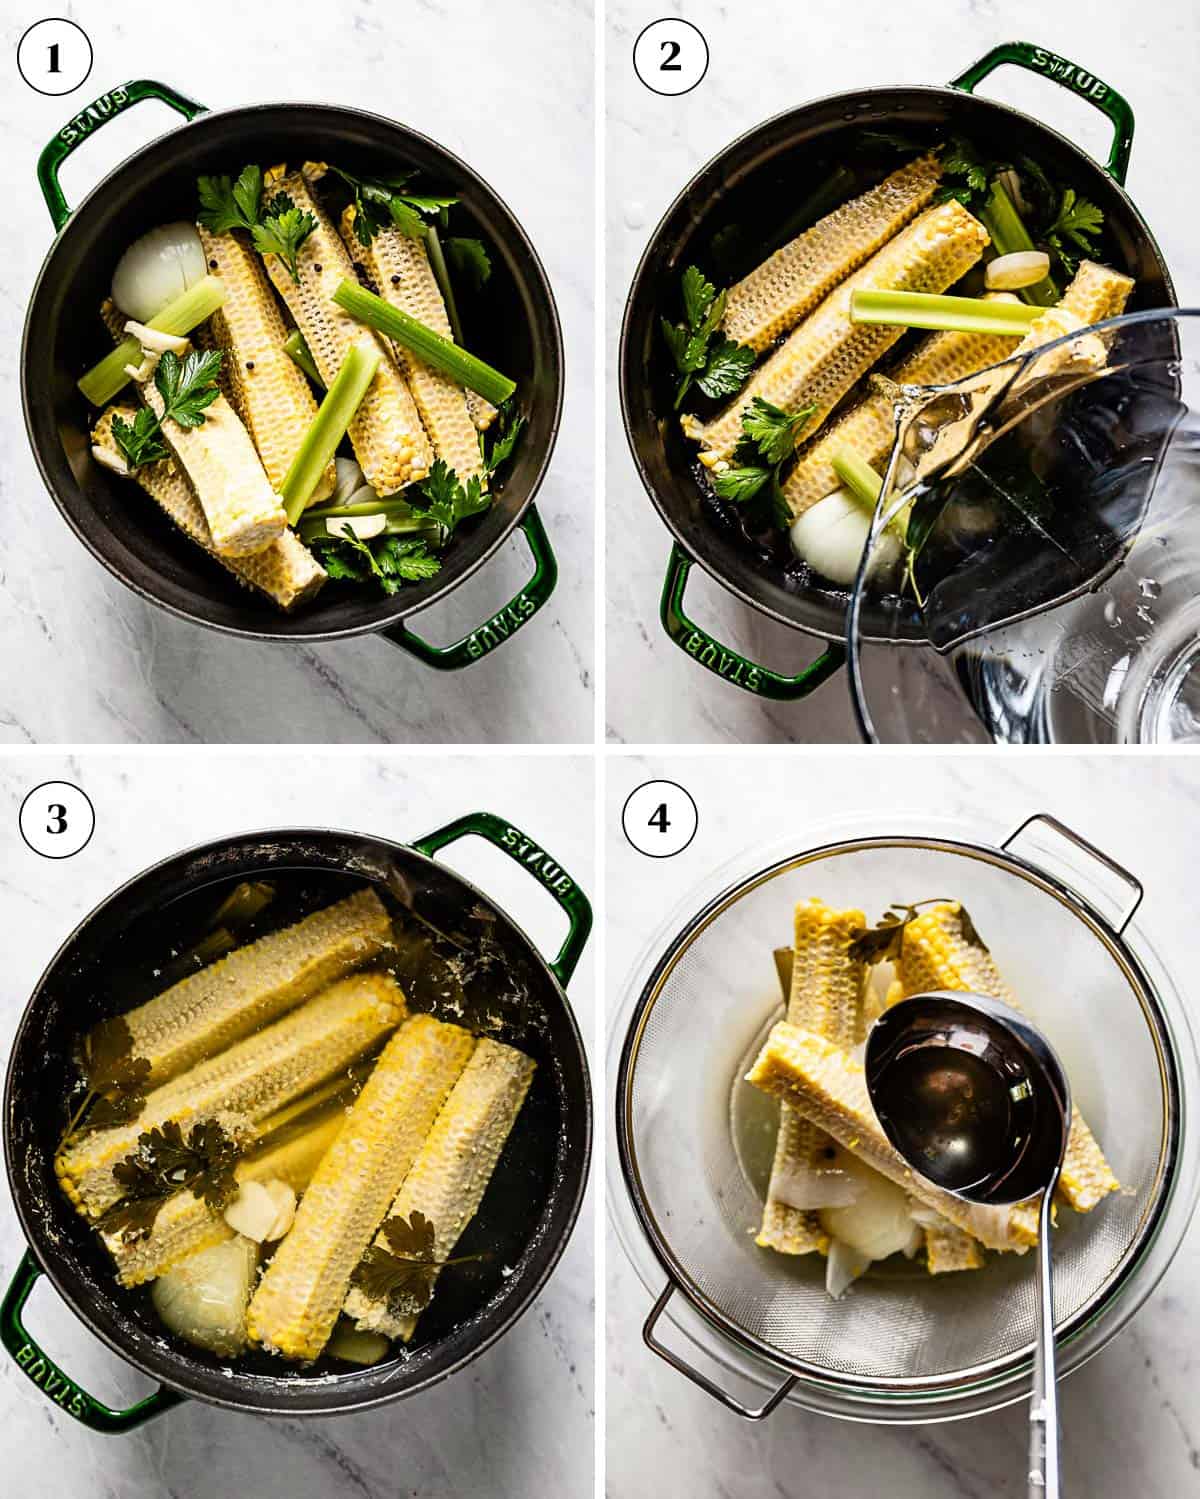 A collage of images showing how to make corn cob stock.